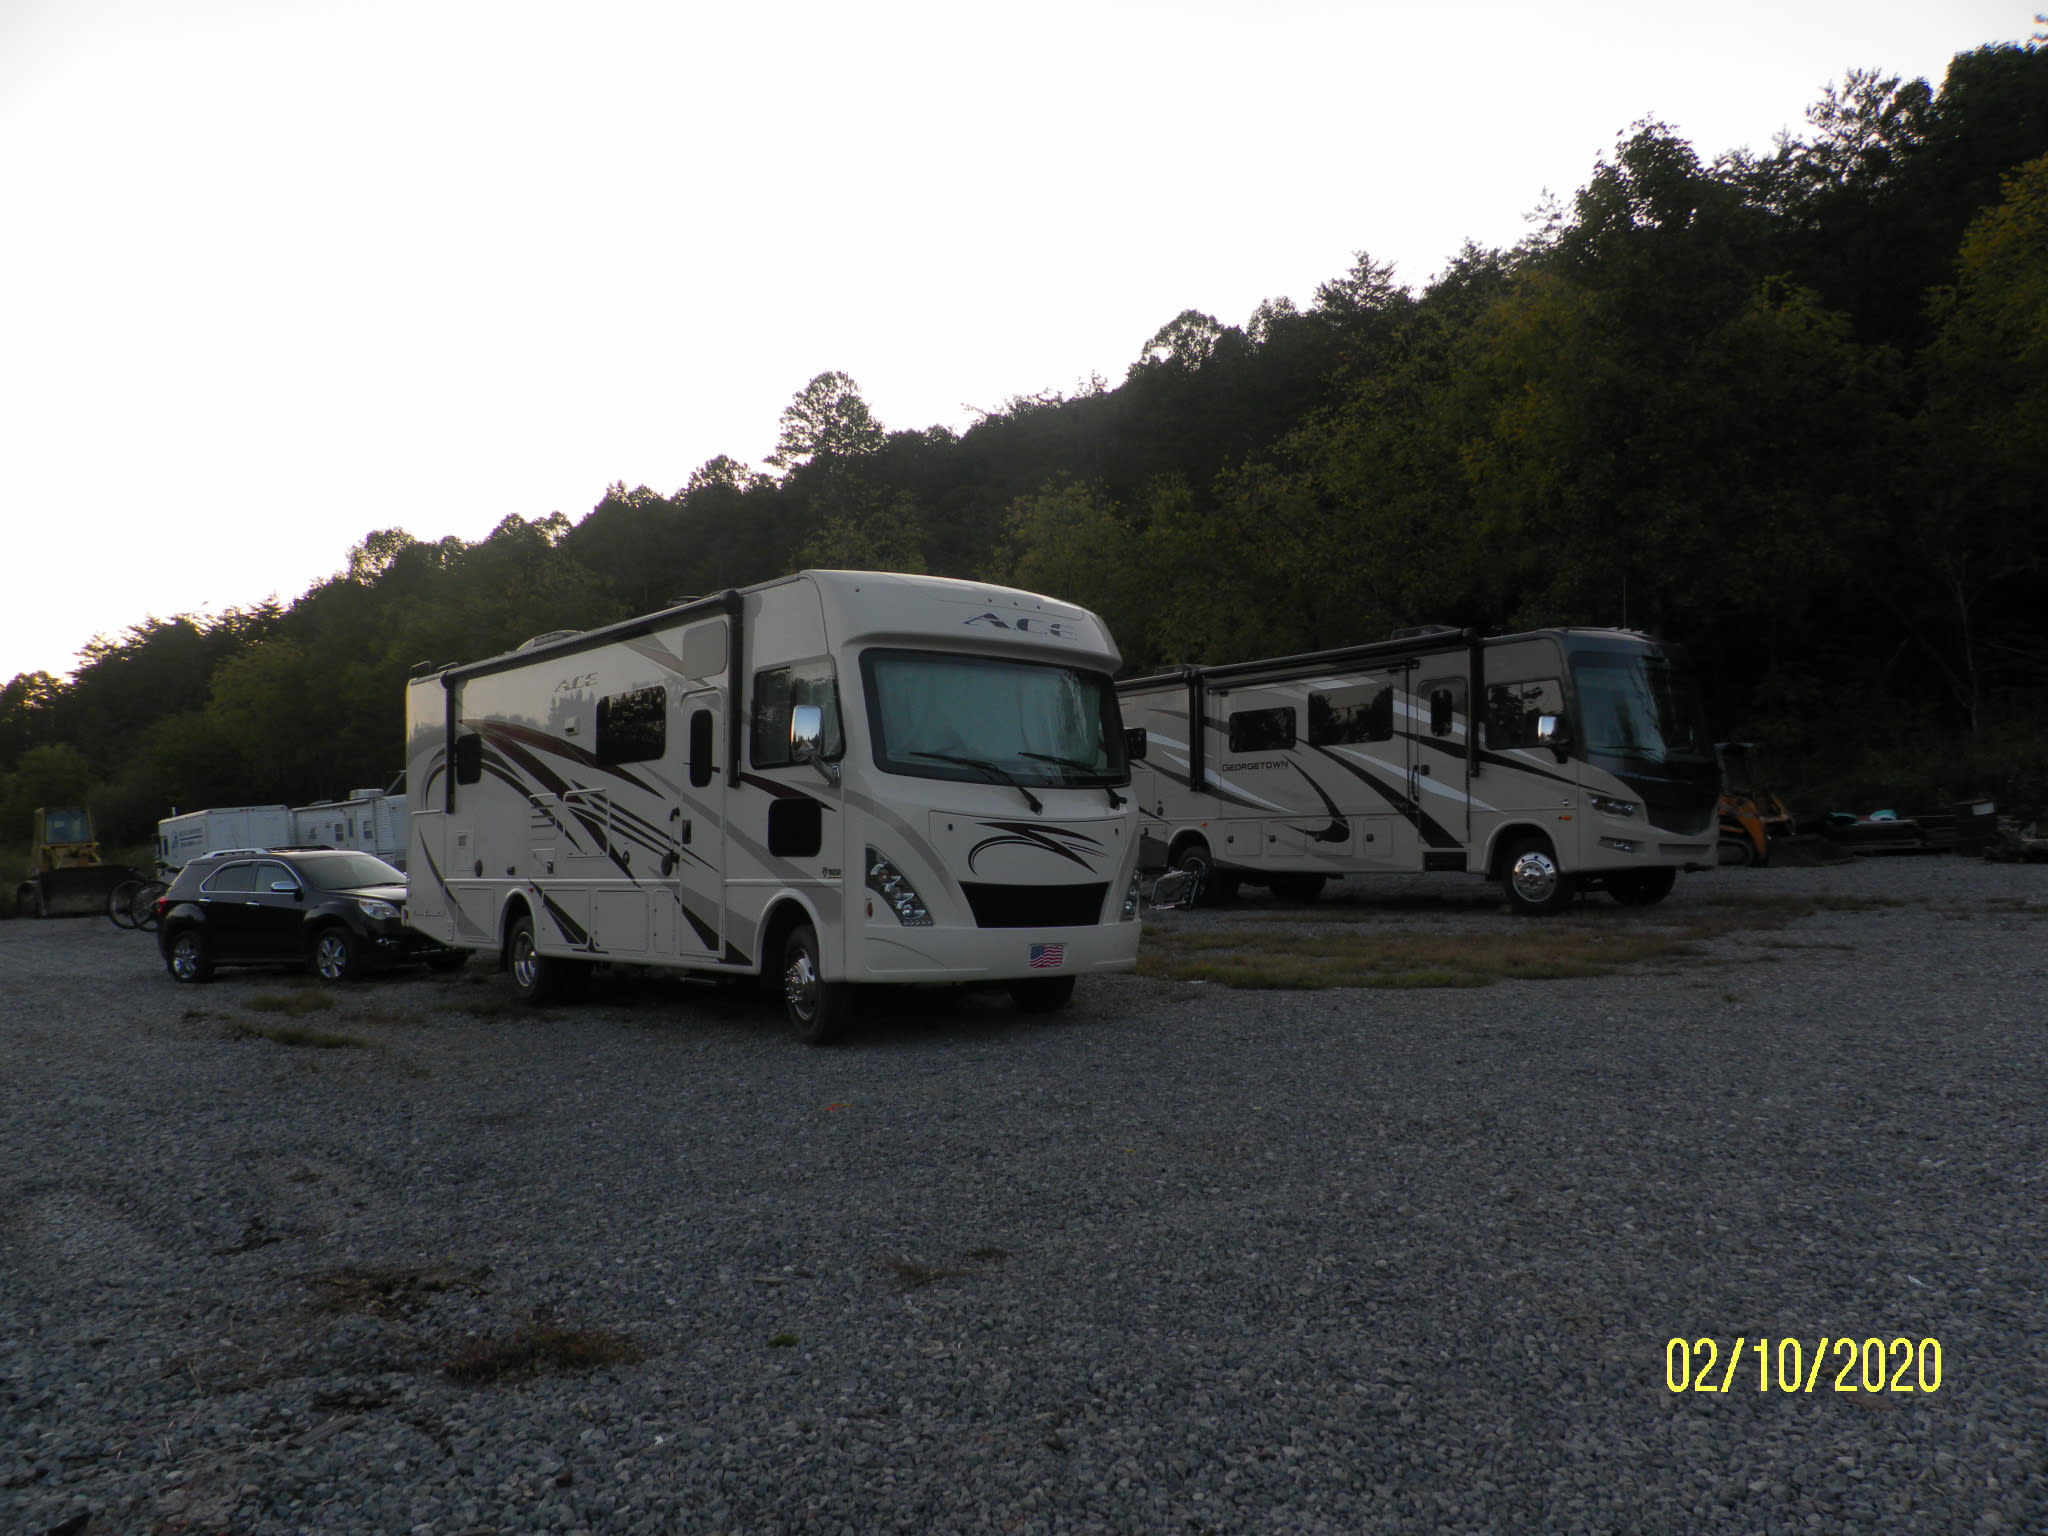 Large parking area. Patrick' is a hidden paradise which consists of 212 acres of woodland and on the Cumberland River. Enjoy camping, fishing, swimming, and hiking. The river provides excellent fishing. 